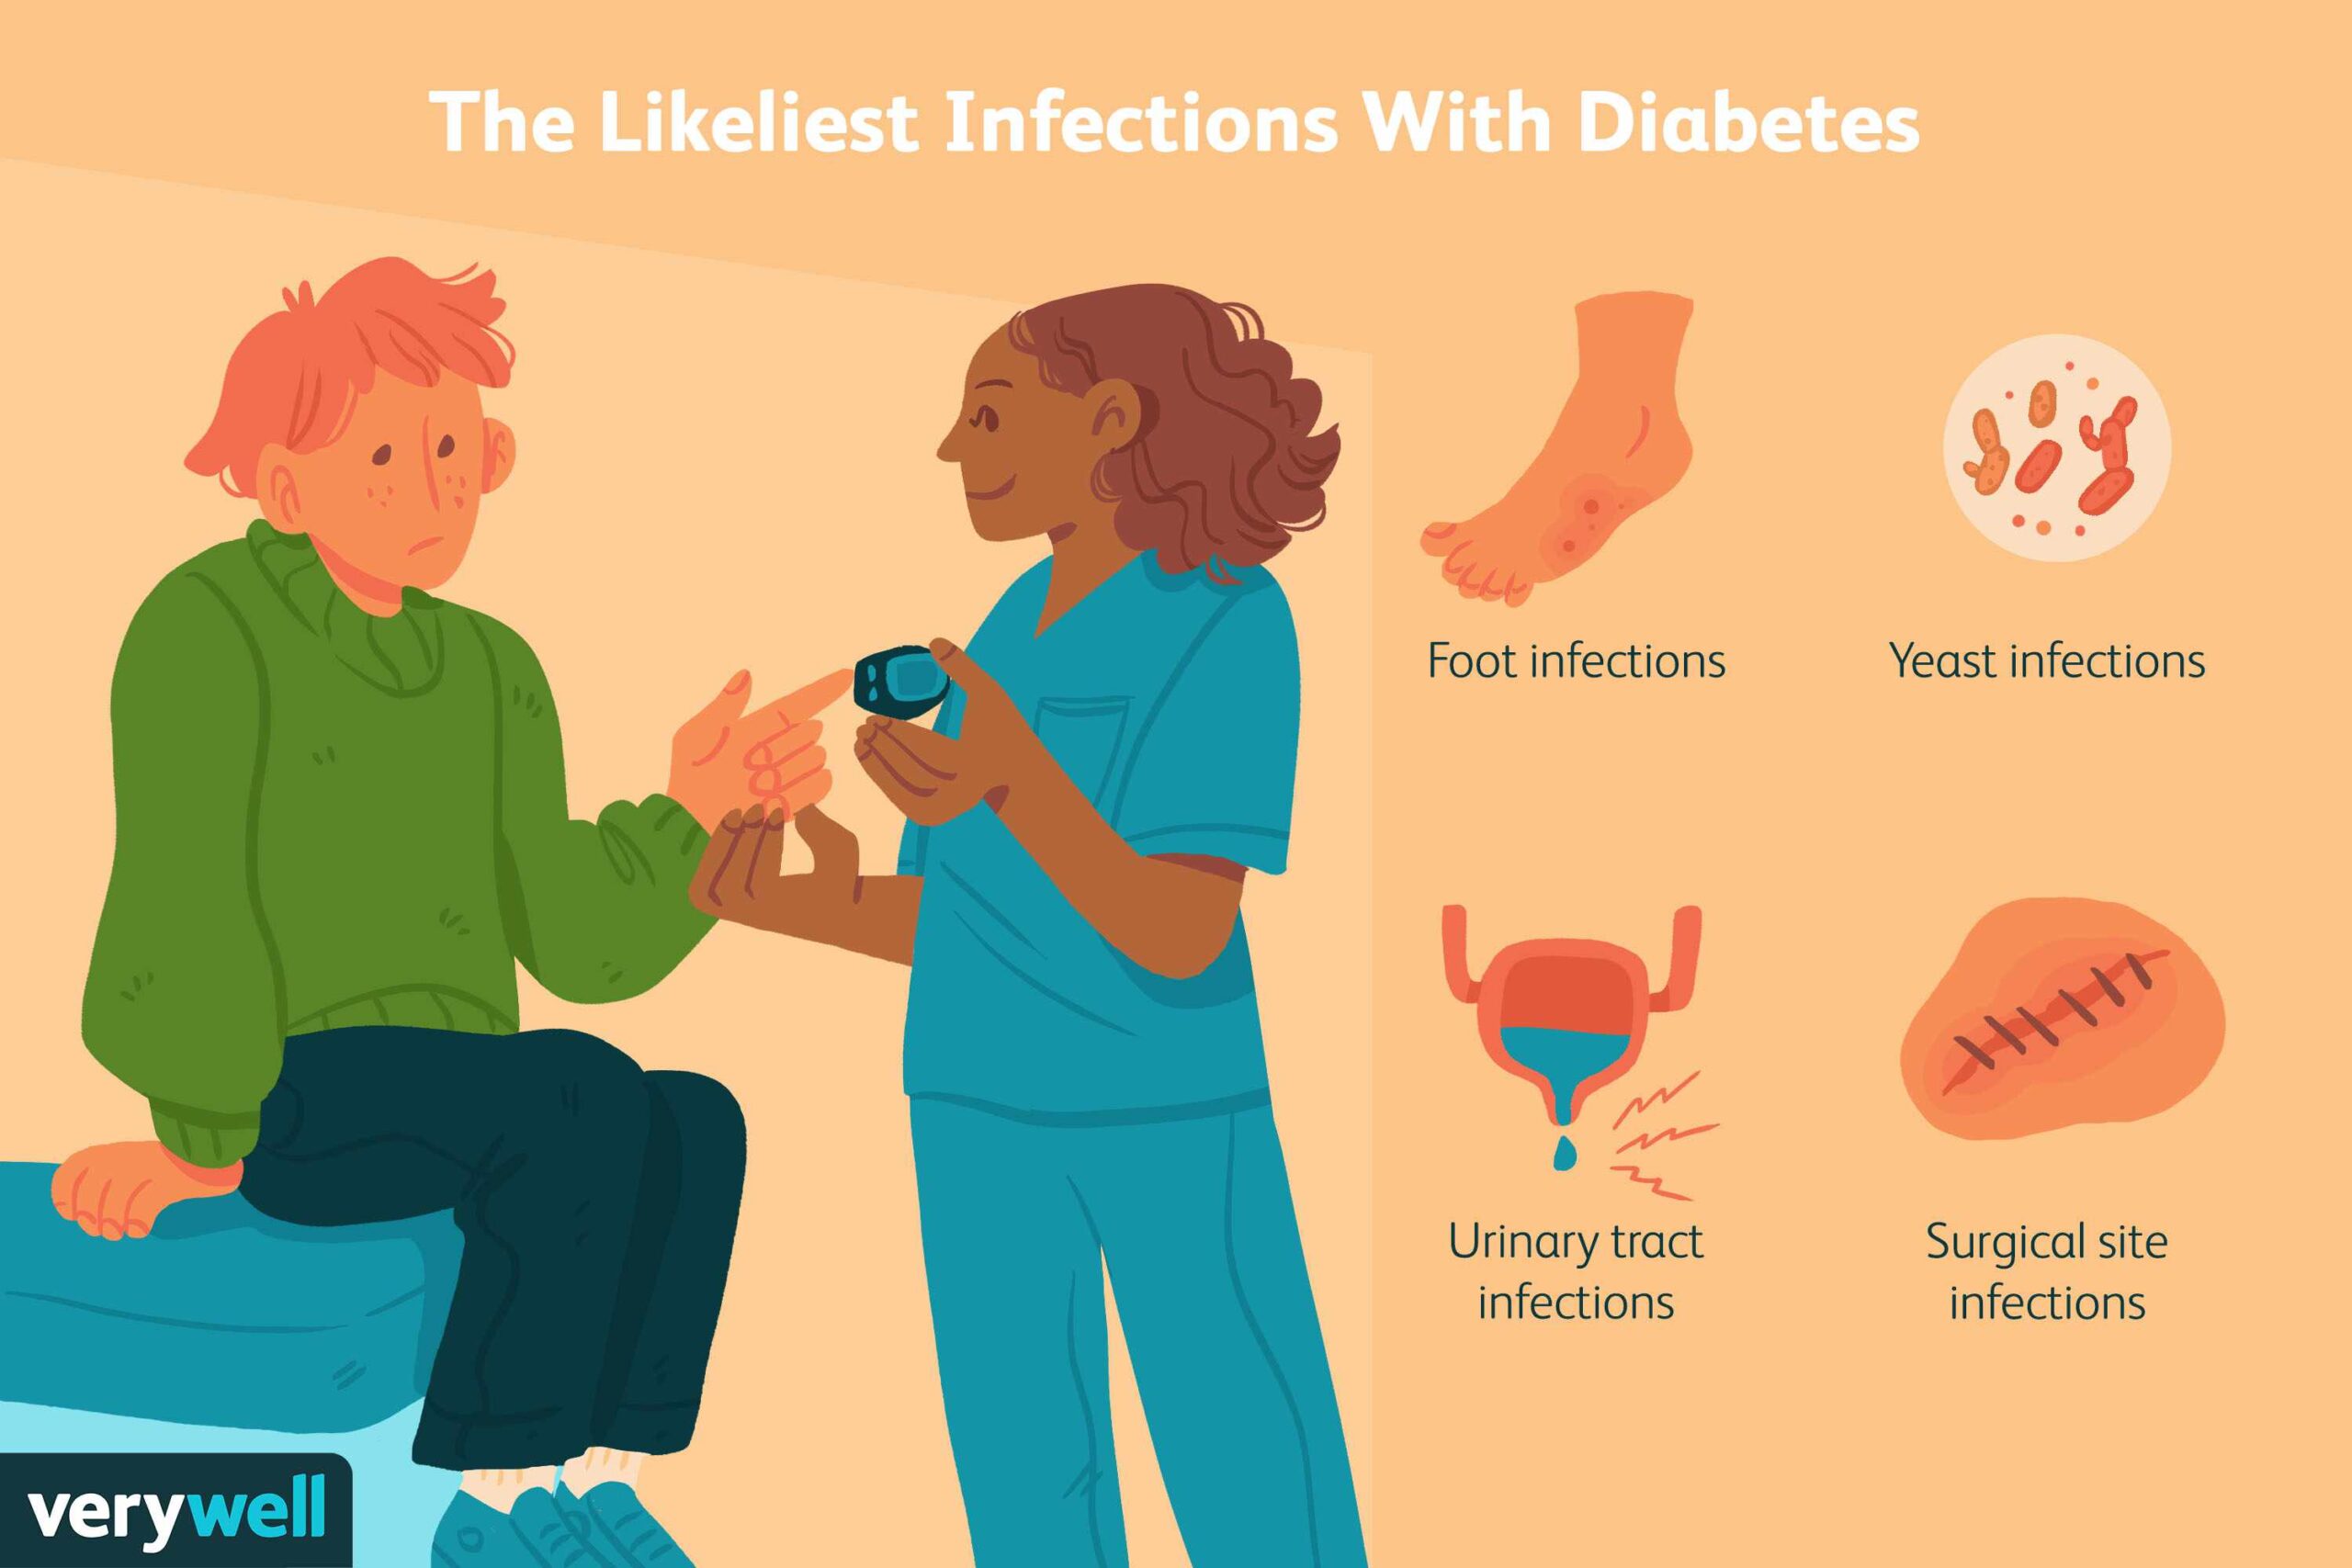 Effects of diabetes on wounds and infections